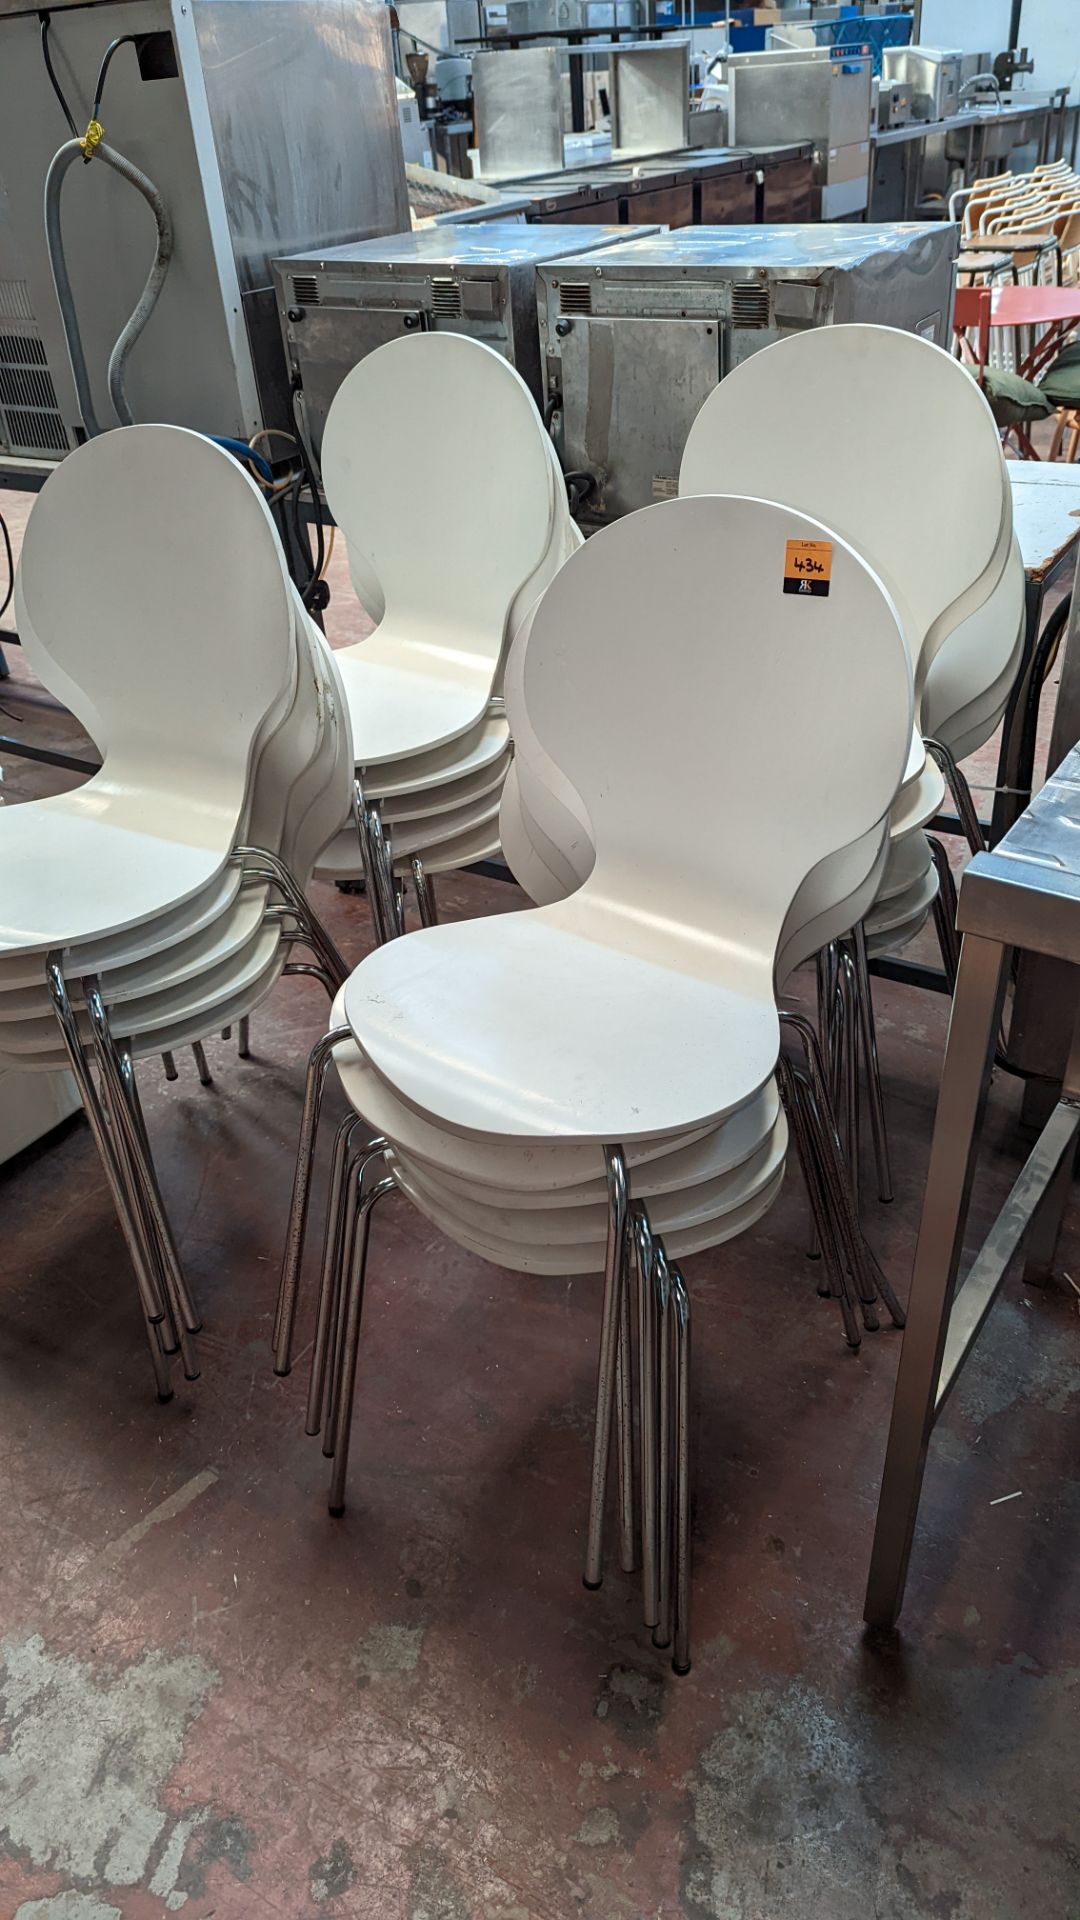 20 matching stacking chairs in white painted wood on chrome bases